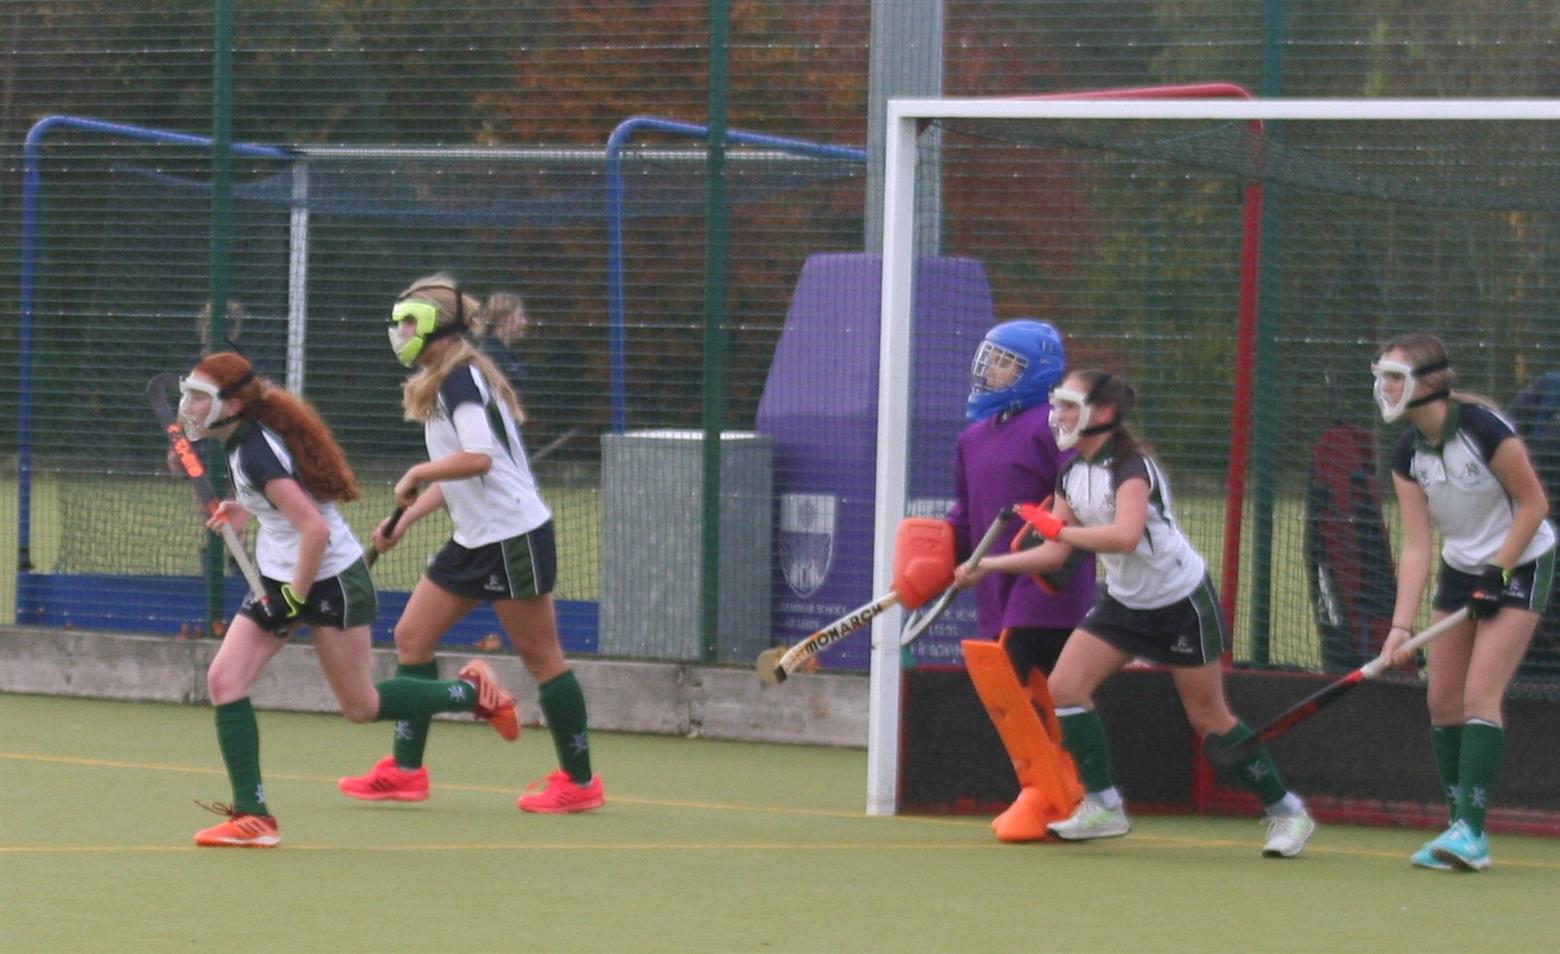 Another superb Saturday morning of hockey against The Grammar School at Leeds.